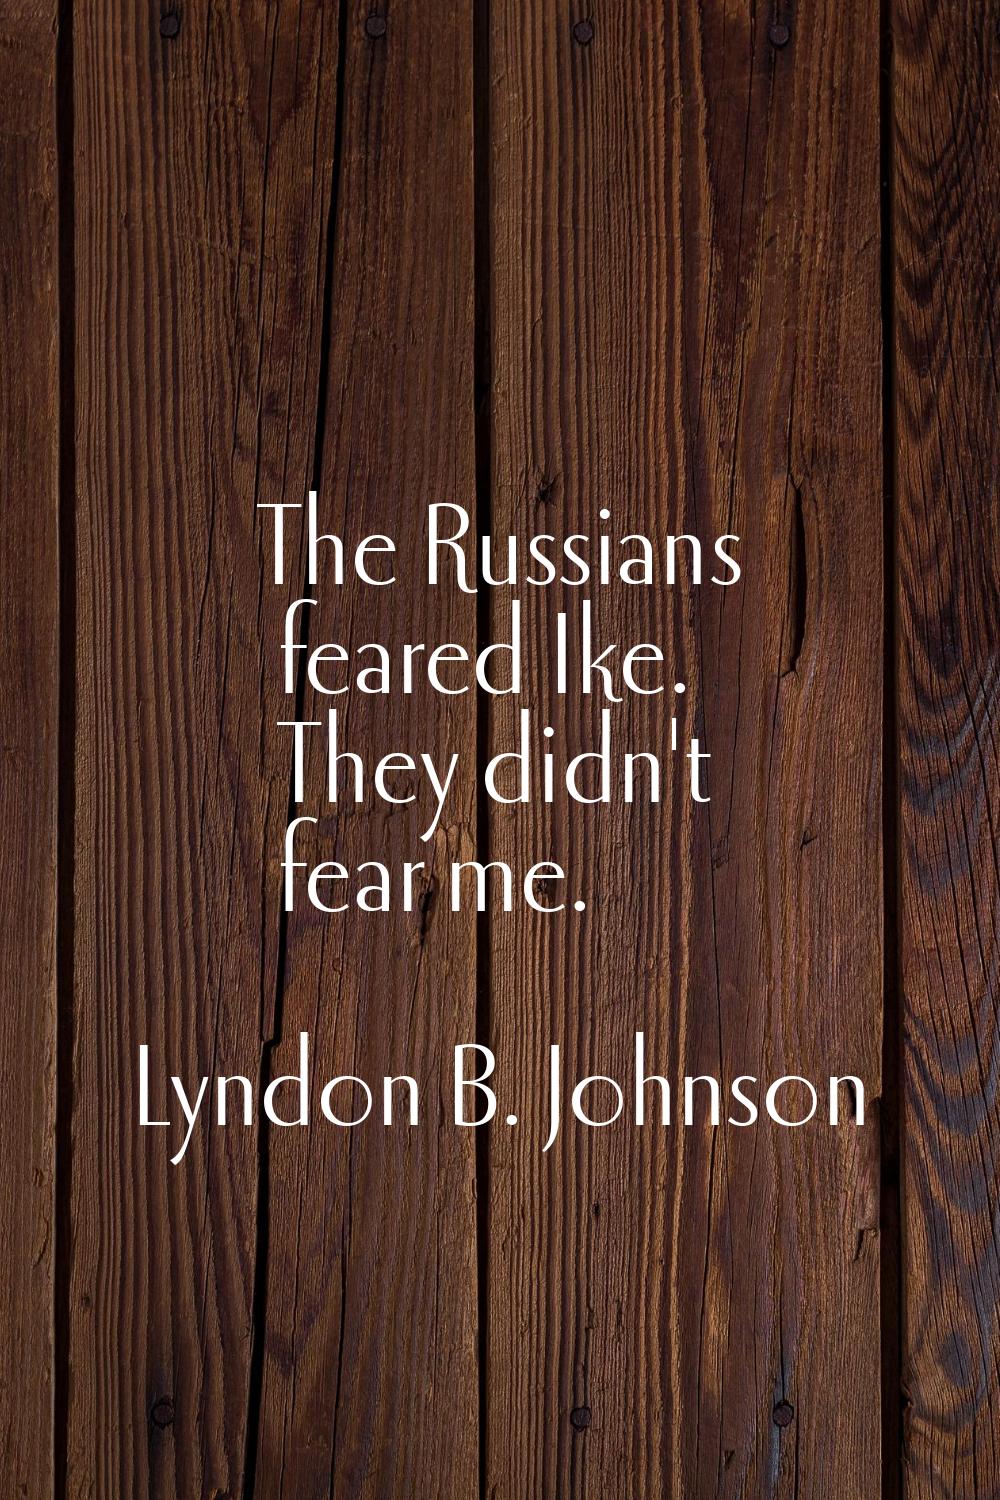 The Russians feared Ike. They didn't fear me.